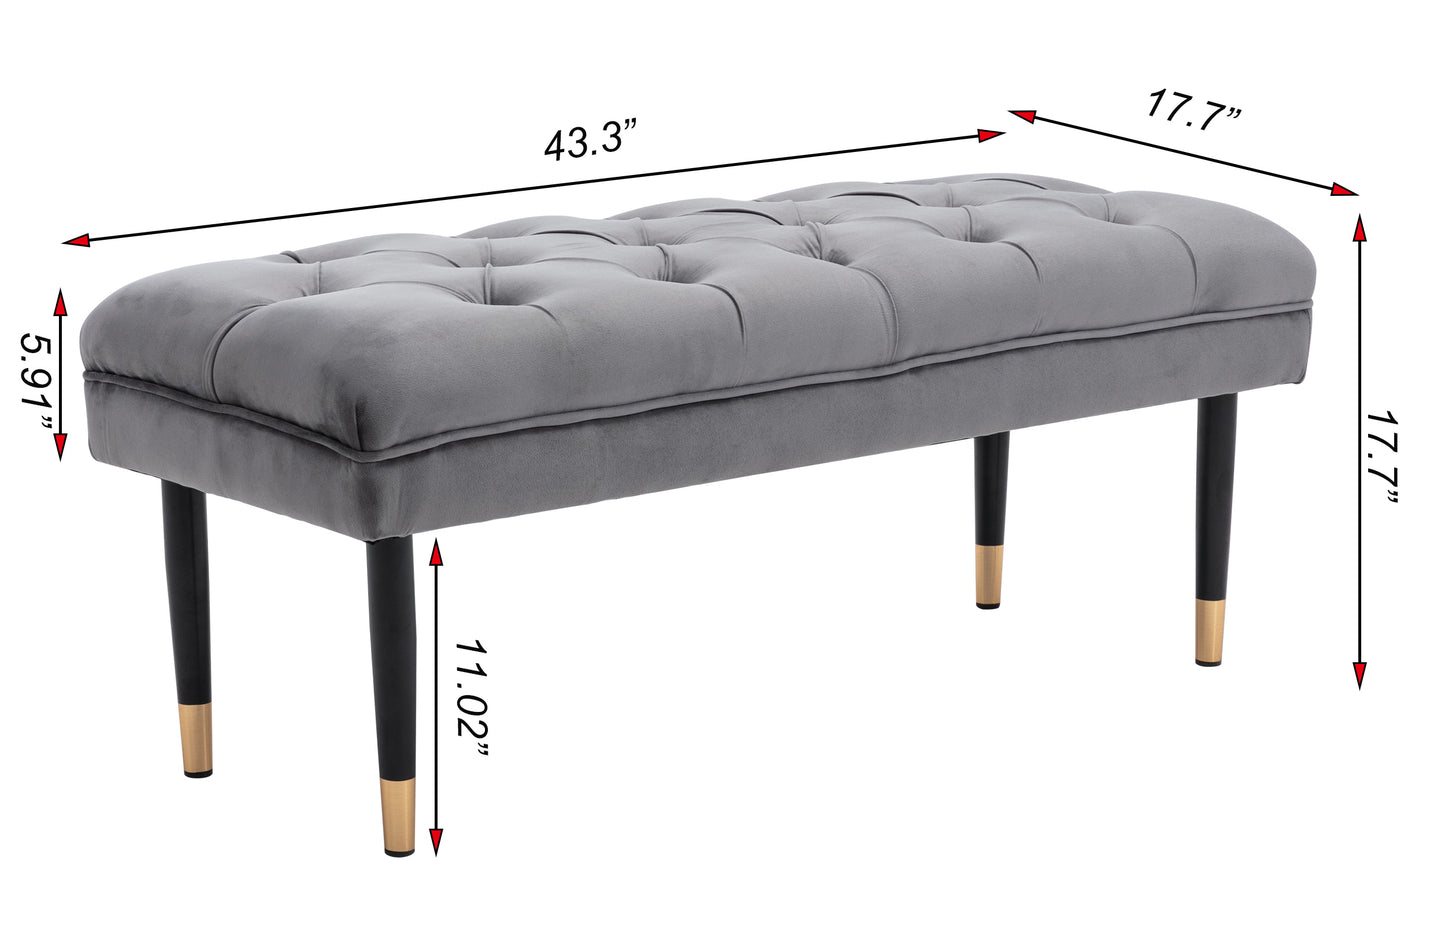 Tufted Bench Modern Velvet Button Upholstered Ottoman enches Bedroom Rectangle Fabric Footstool with Metal Legs for Living Room Entryway, Grey